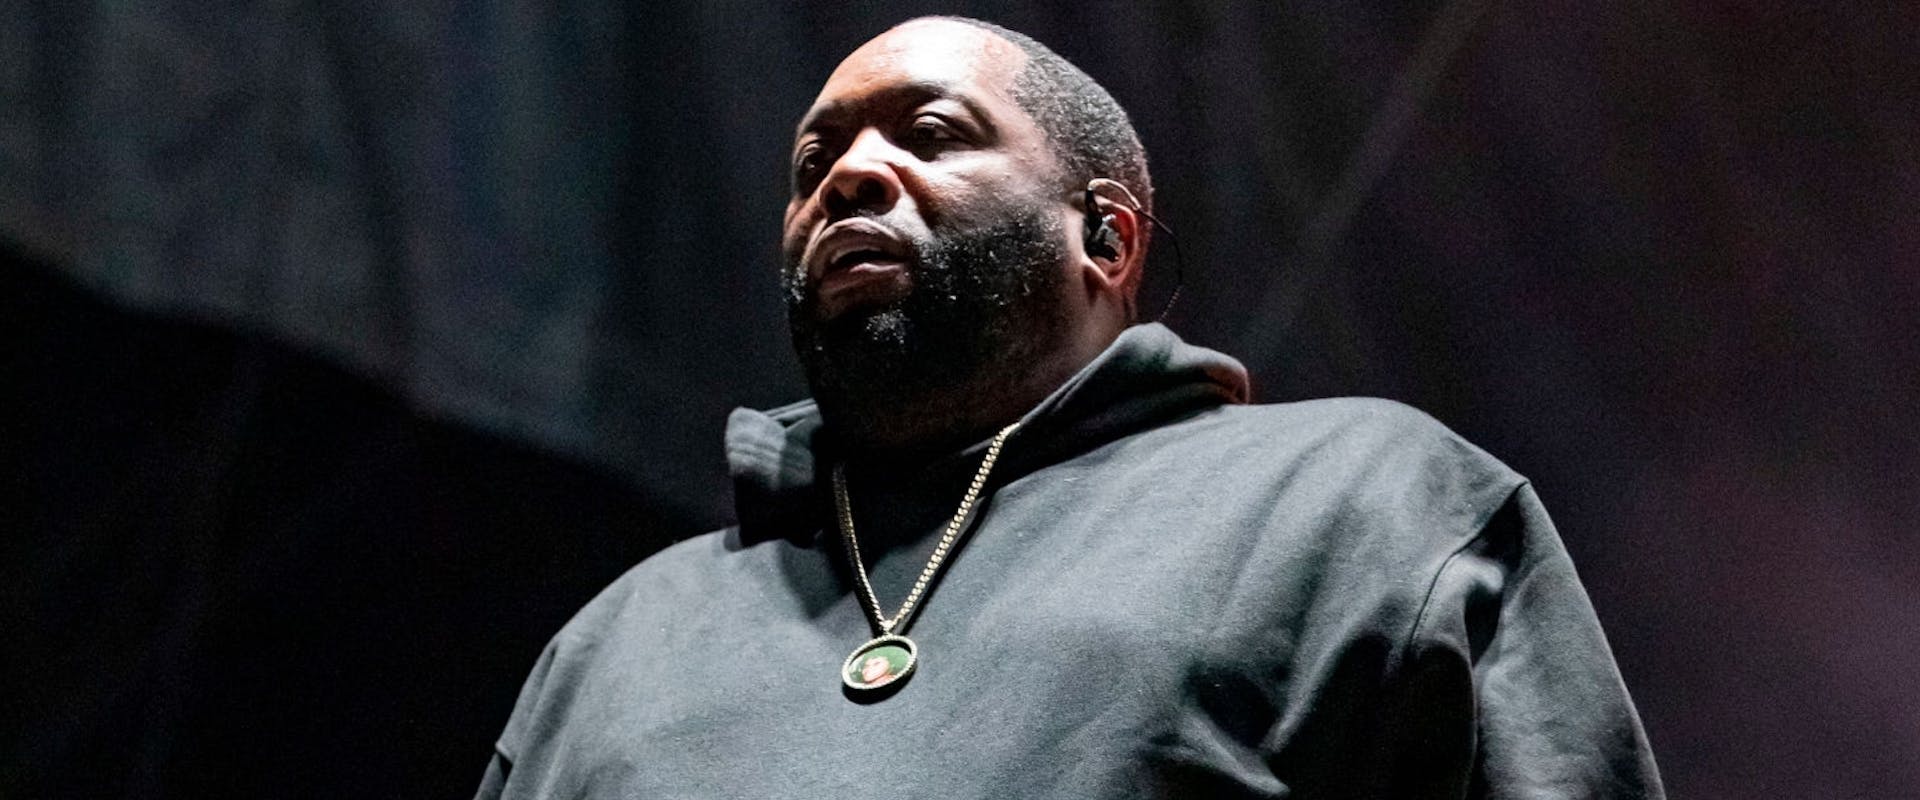 Rap Trap: Hip-Hop on Trial' Documentary Features Killer Mike, Fat Joe, and  More